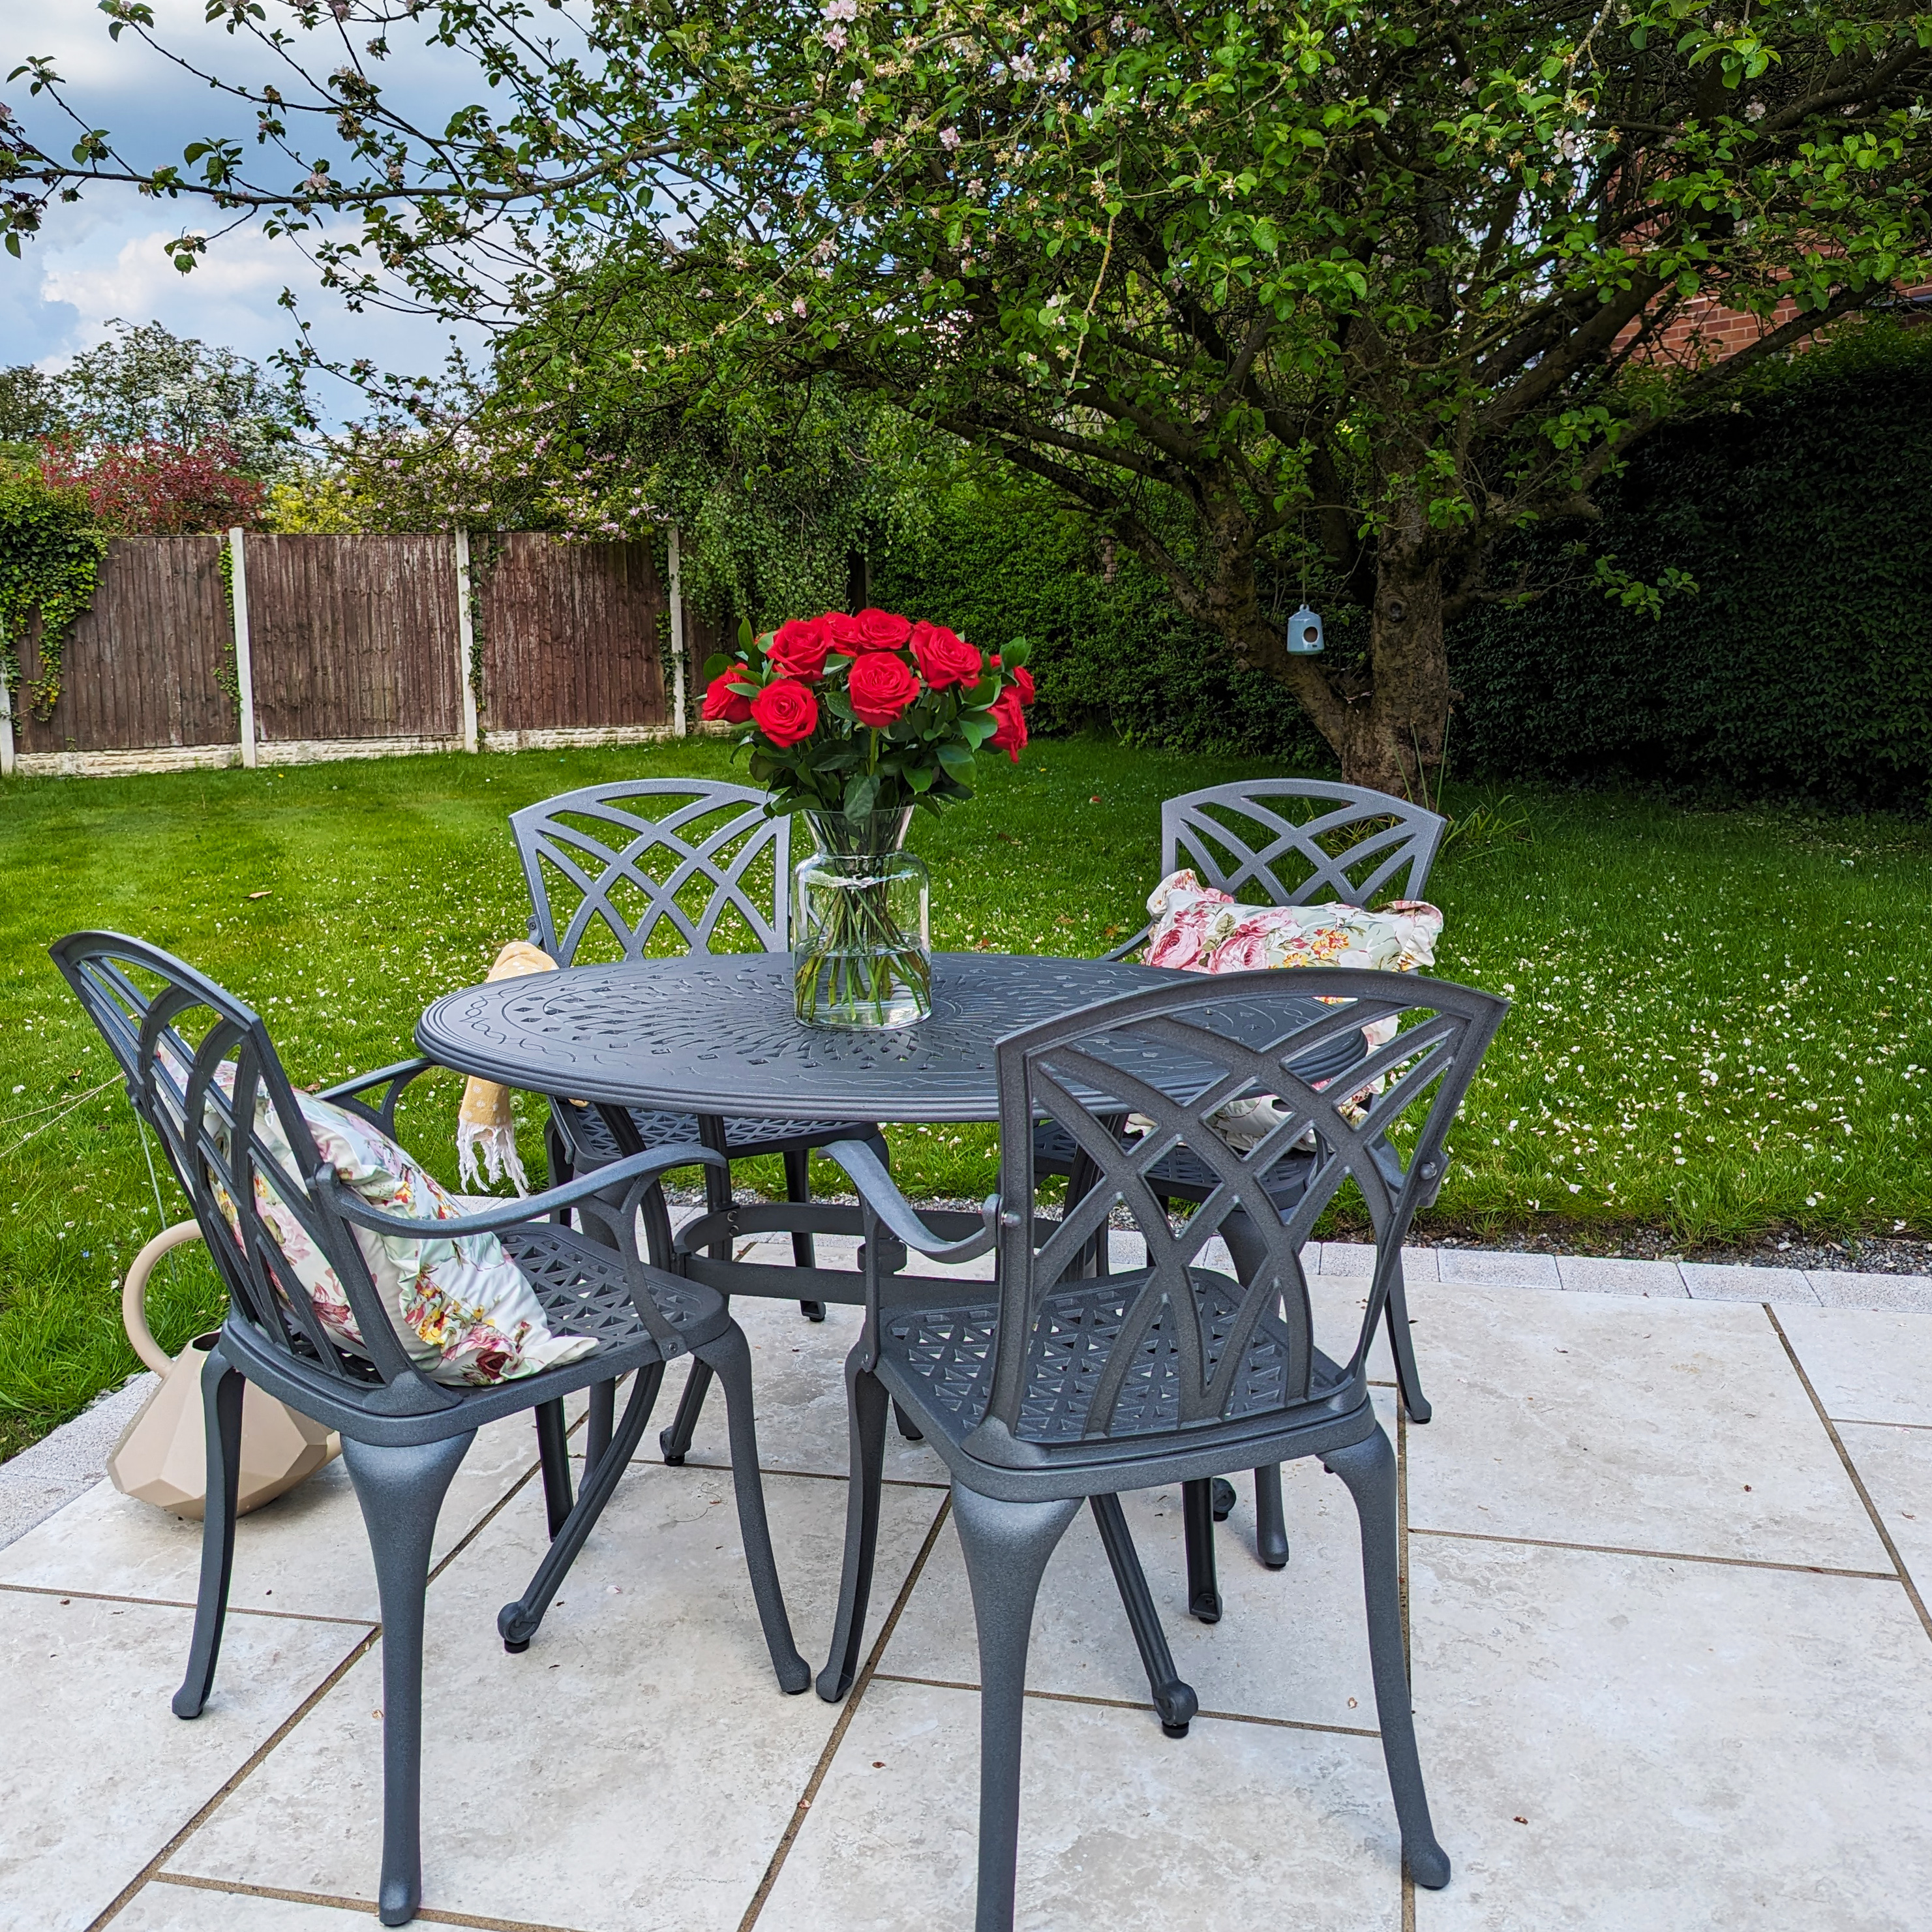 How to correctly measure your patio for a Small Garden Table & Chairs